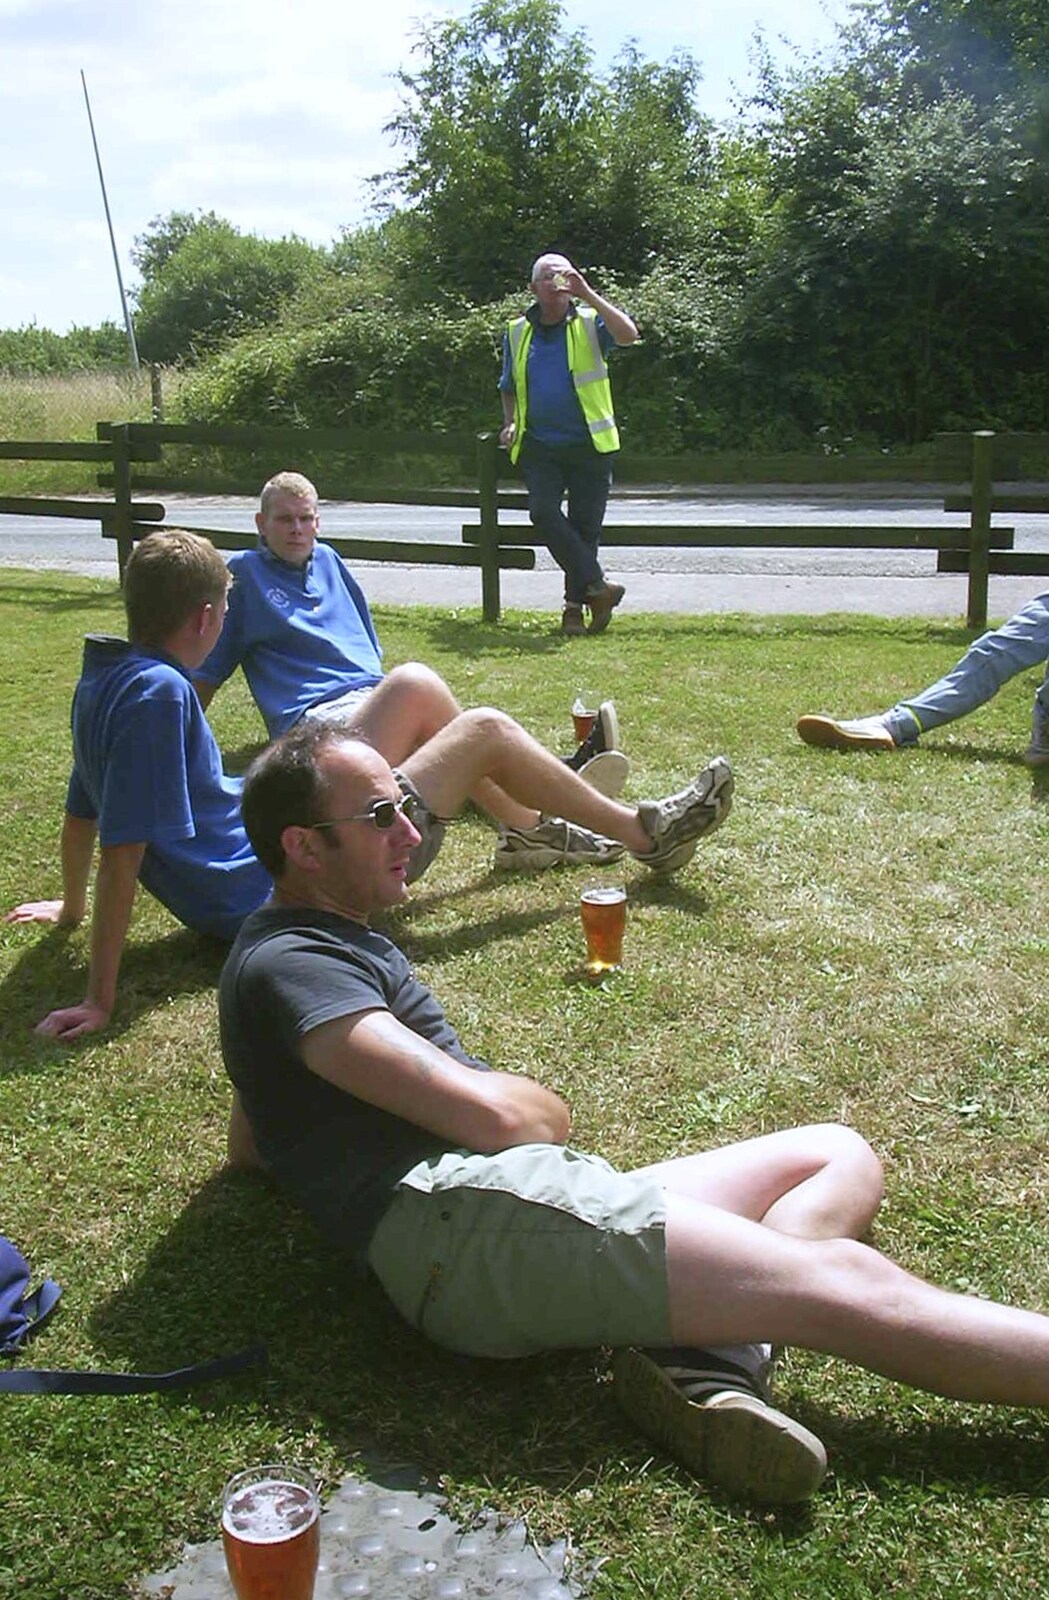 The BSCC Annual Bike Ride, Orford, Suffolk - 12th July 2003: DH and his beer